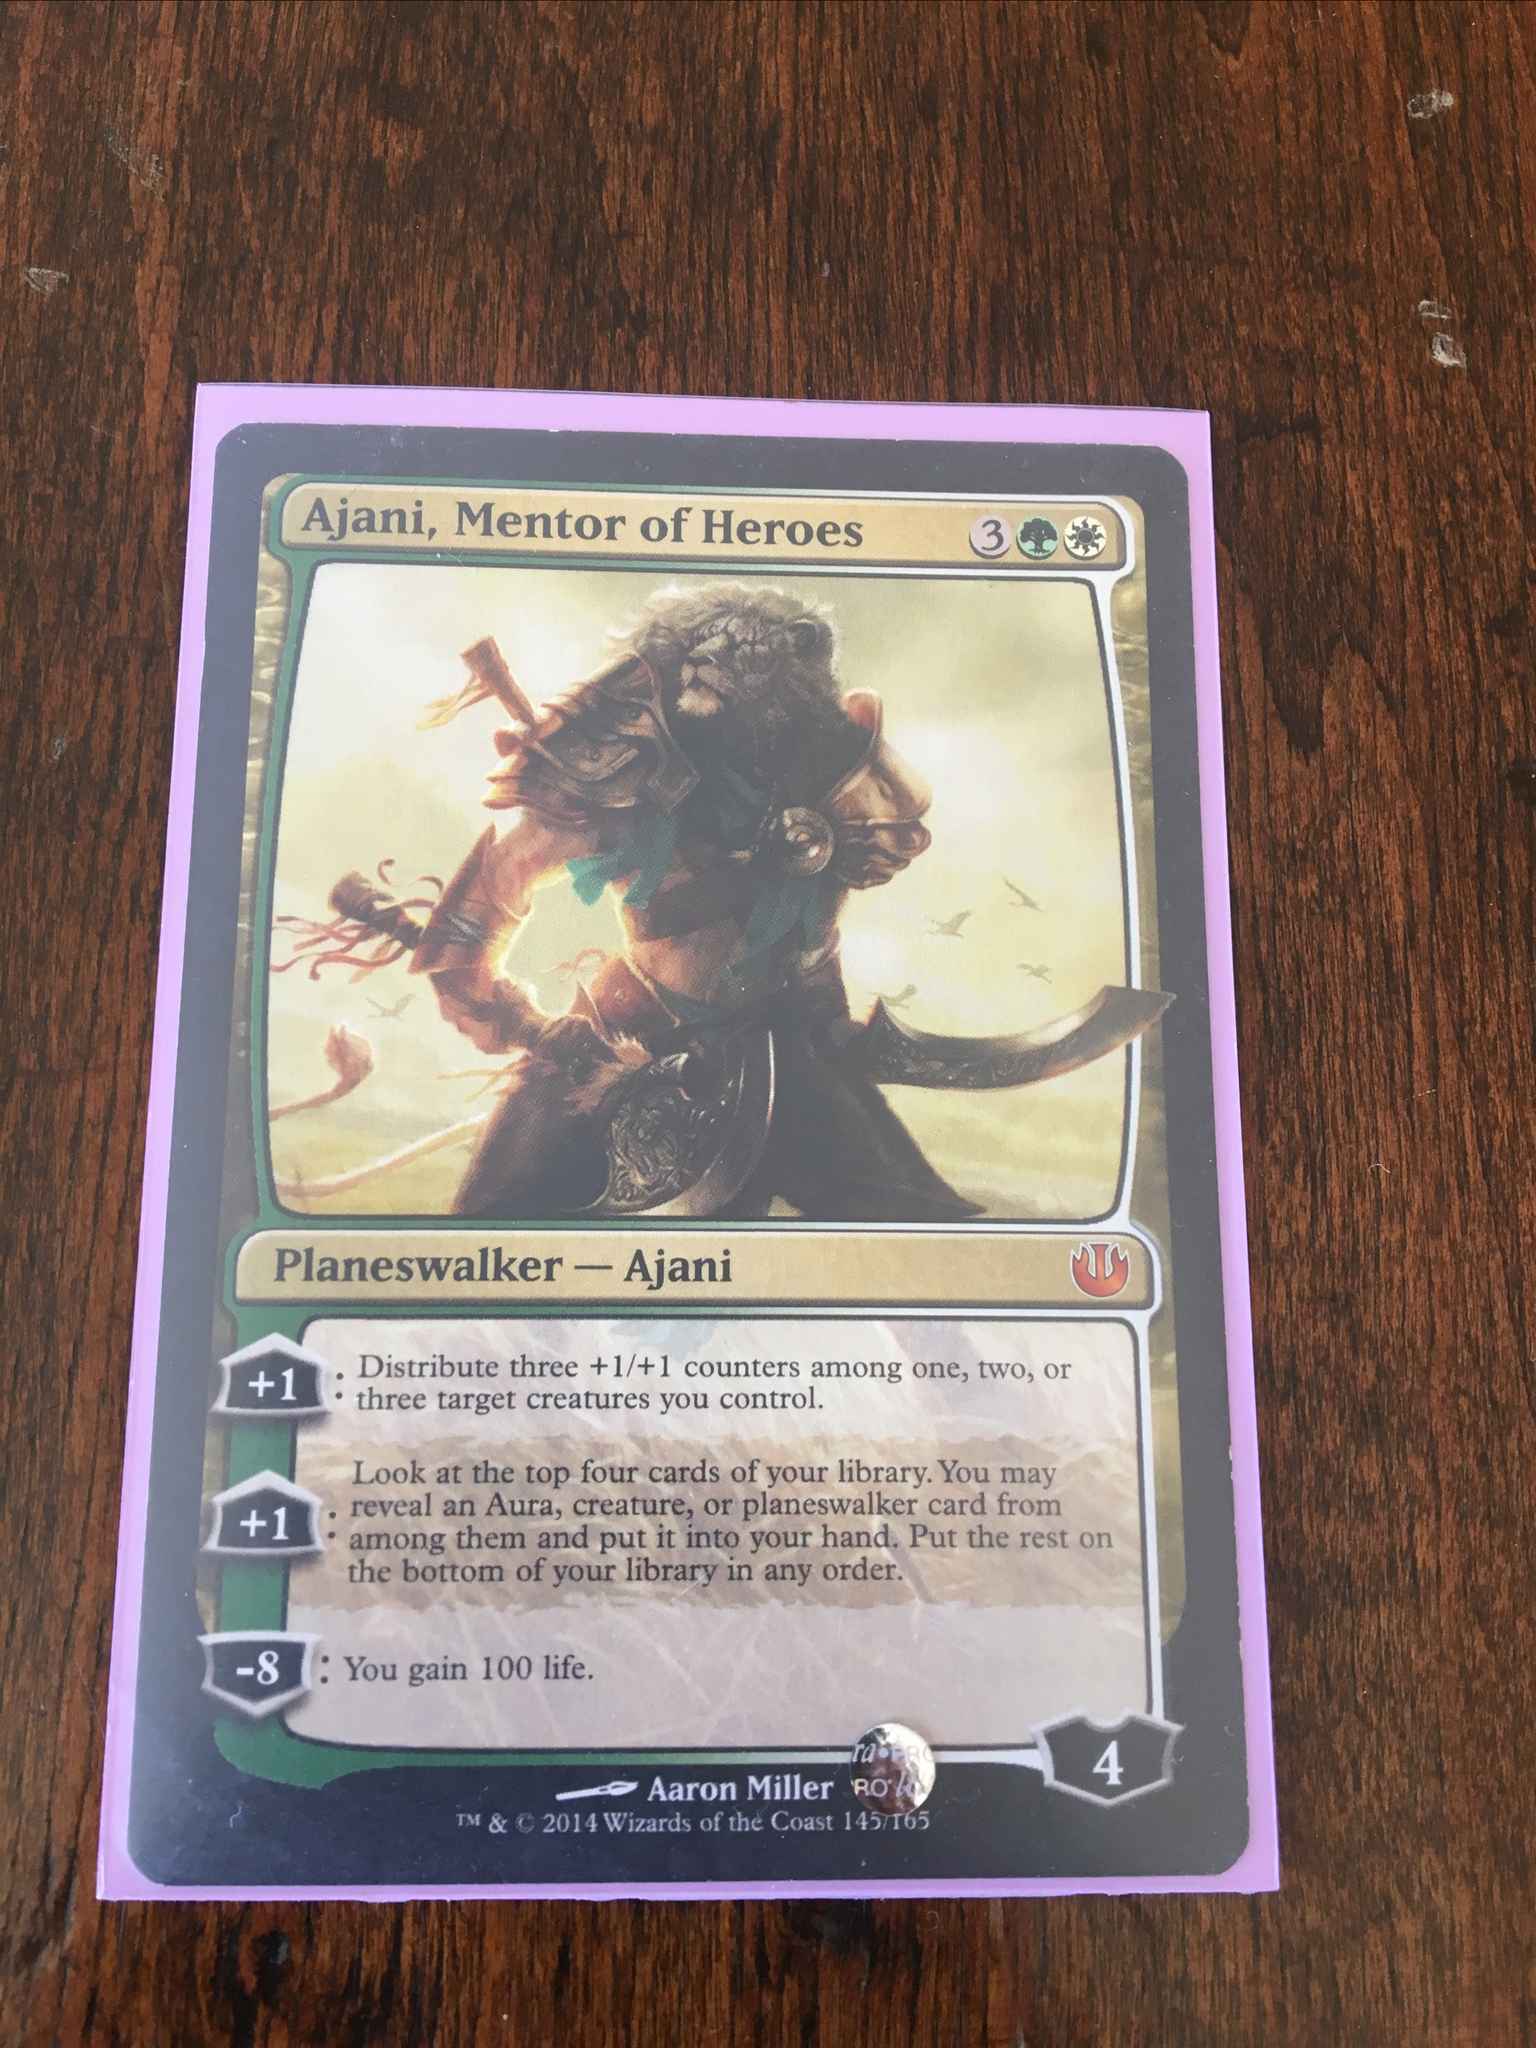 Ajani, Mentor of Heroes LP : Ajani, Mentor of Heroes - Journey Into Nyx, Magic: the - Online Gaming Store for Cards, Miniatures, Singles, Packs & Booster